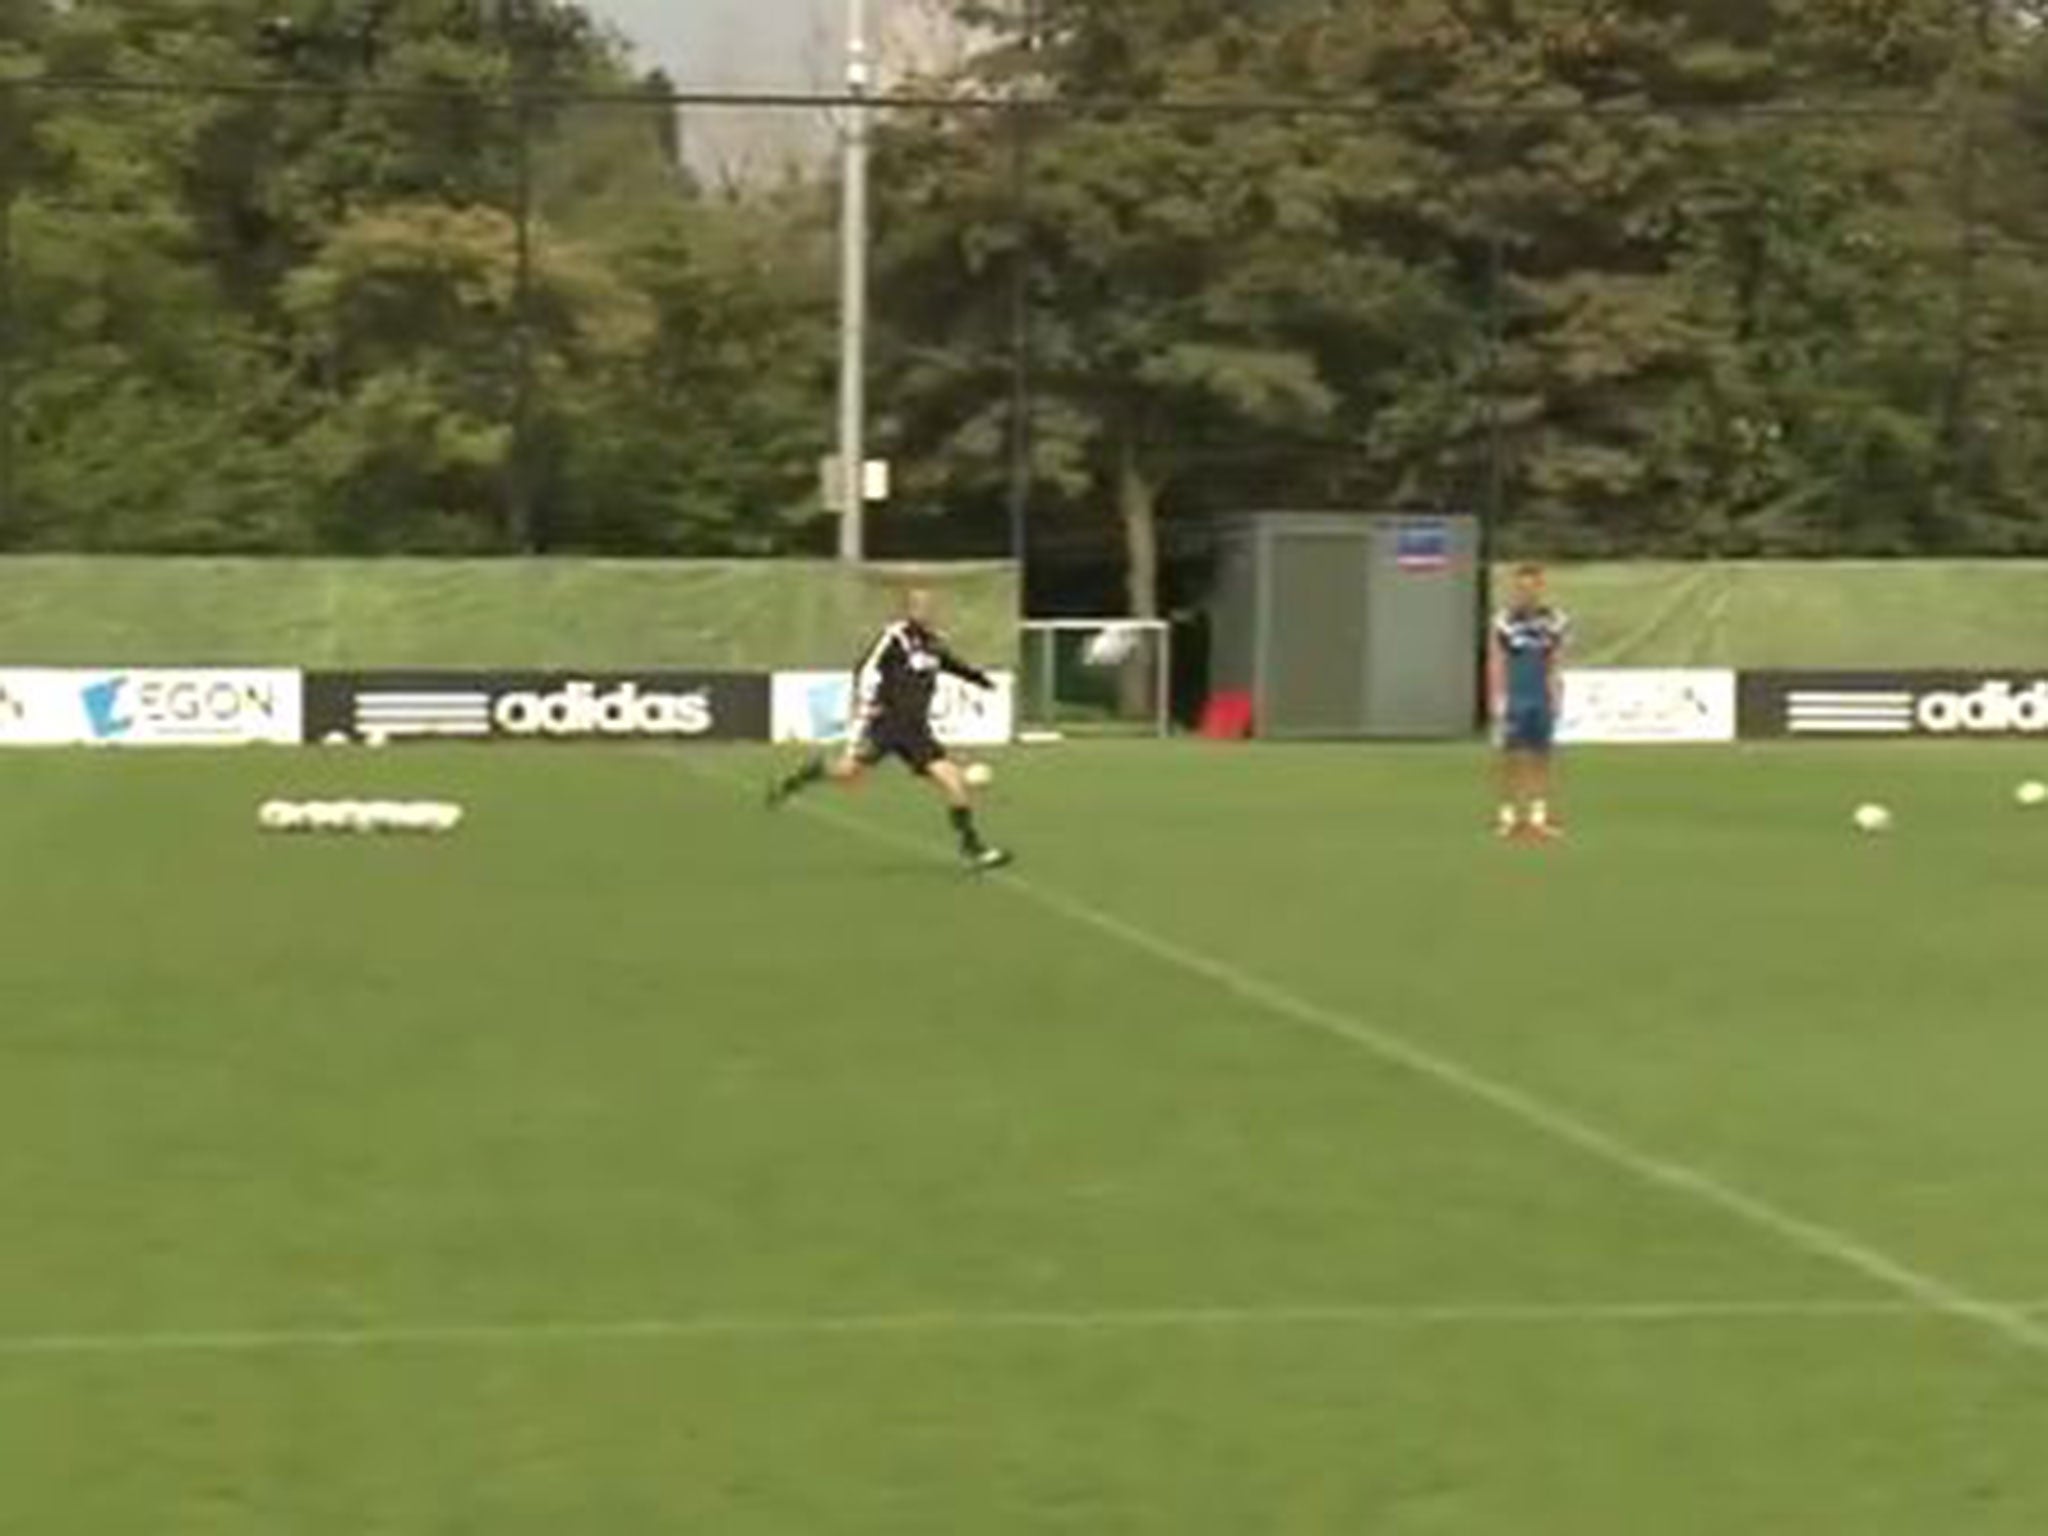 Dennis Bergkamp has been filmed executing a perfect volley at Ajax training